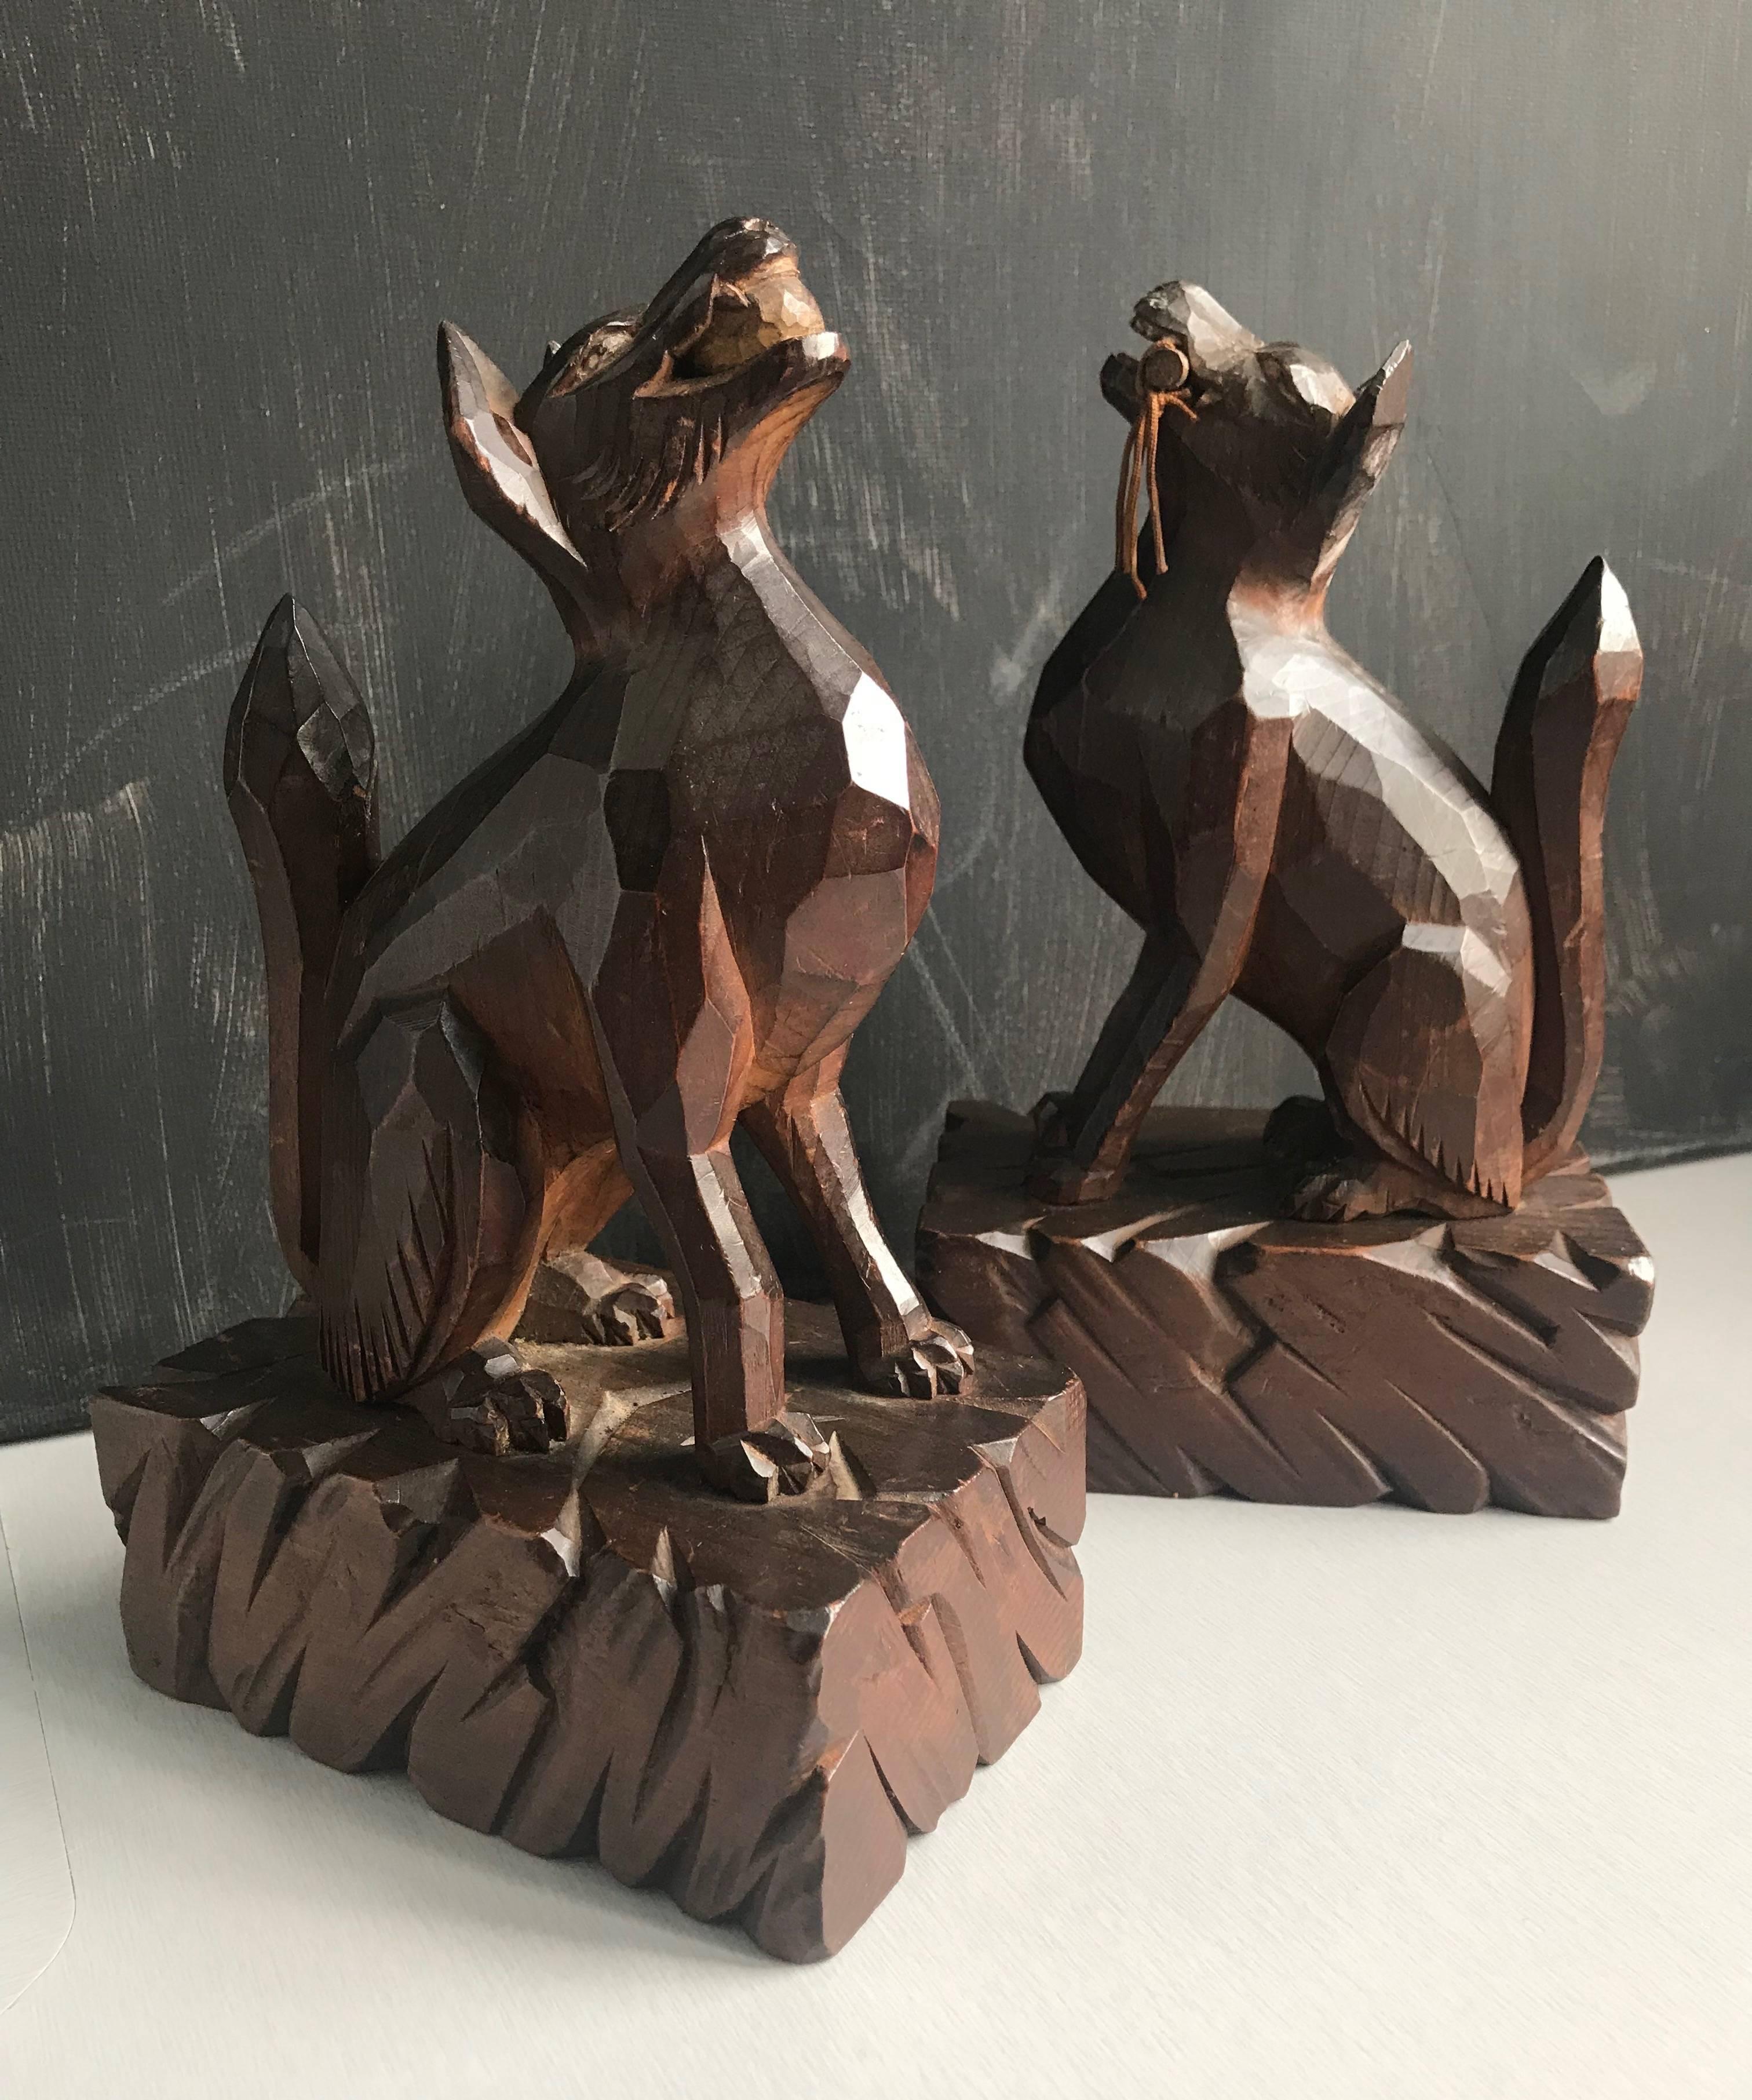 Go fetch!!

These wonderfully stylized dog sculptures truly display the energy and joy of dogs when they have just fetched an object. They can't wait for you to take the stick or ball back from them so they can retrieve it again, and again and